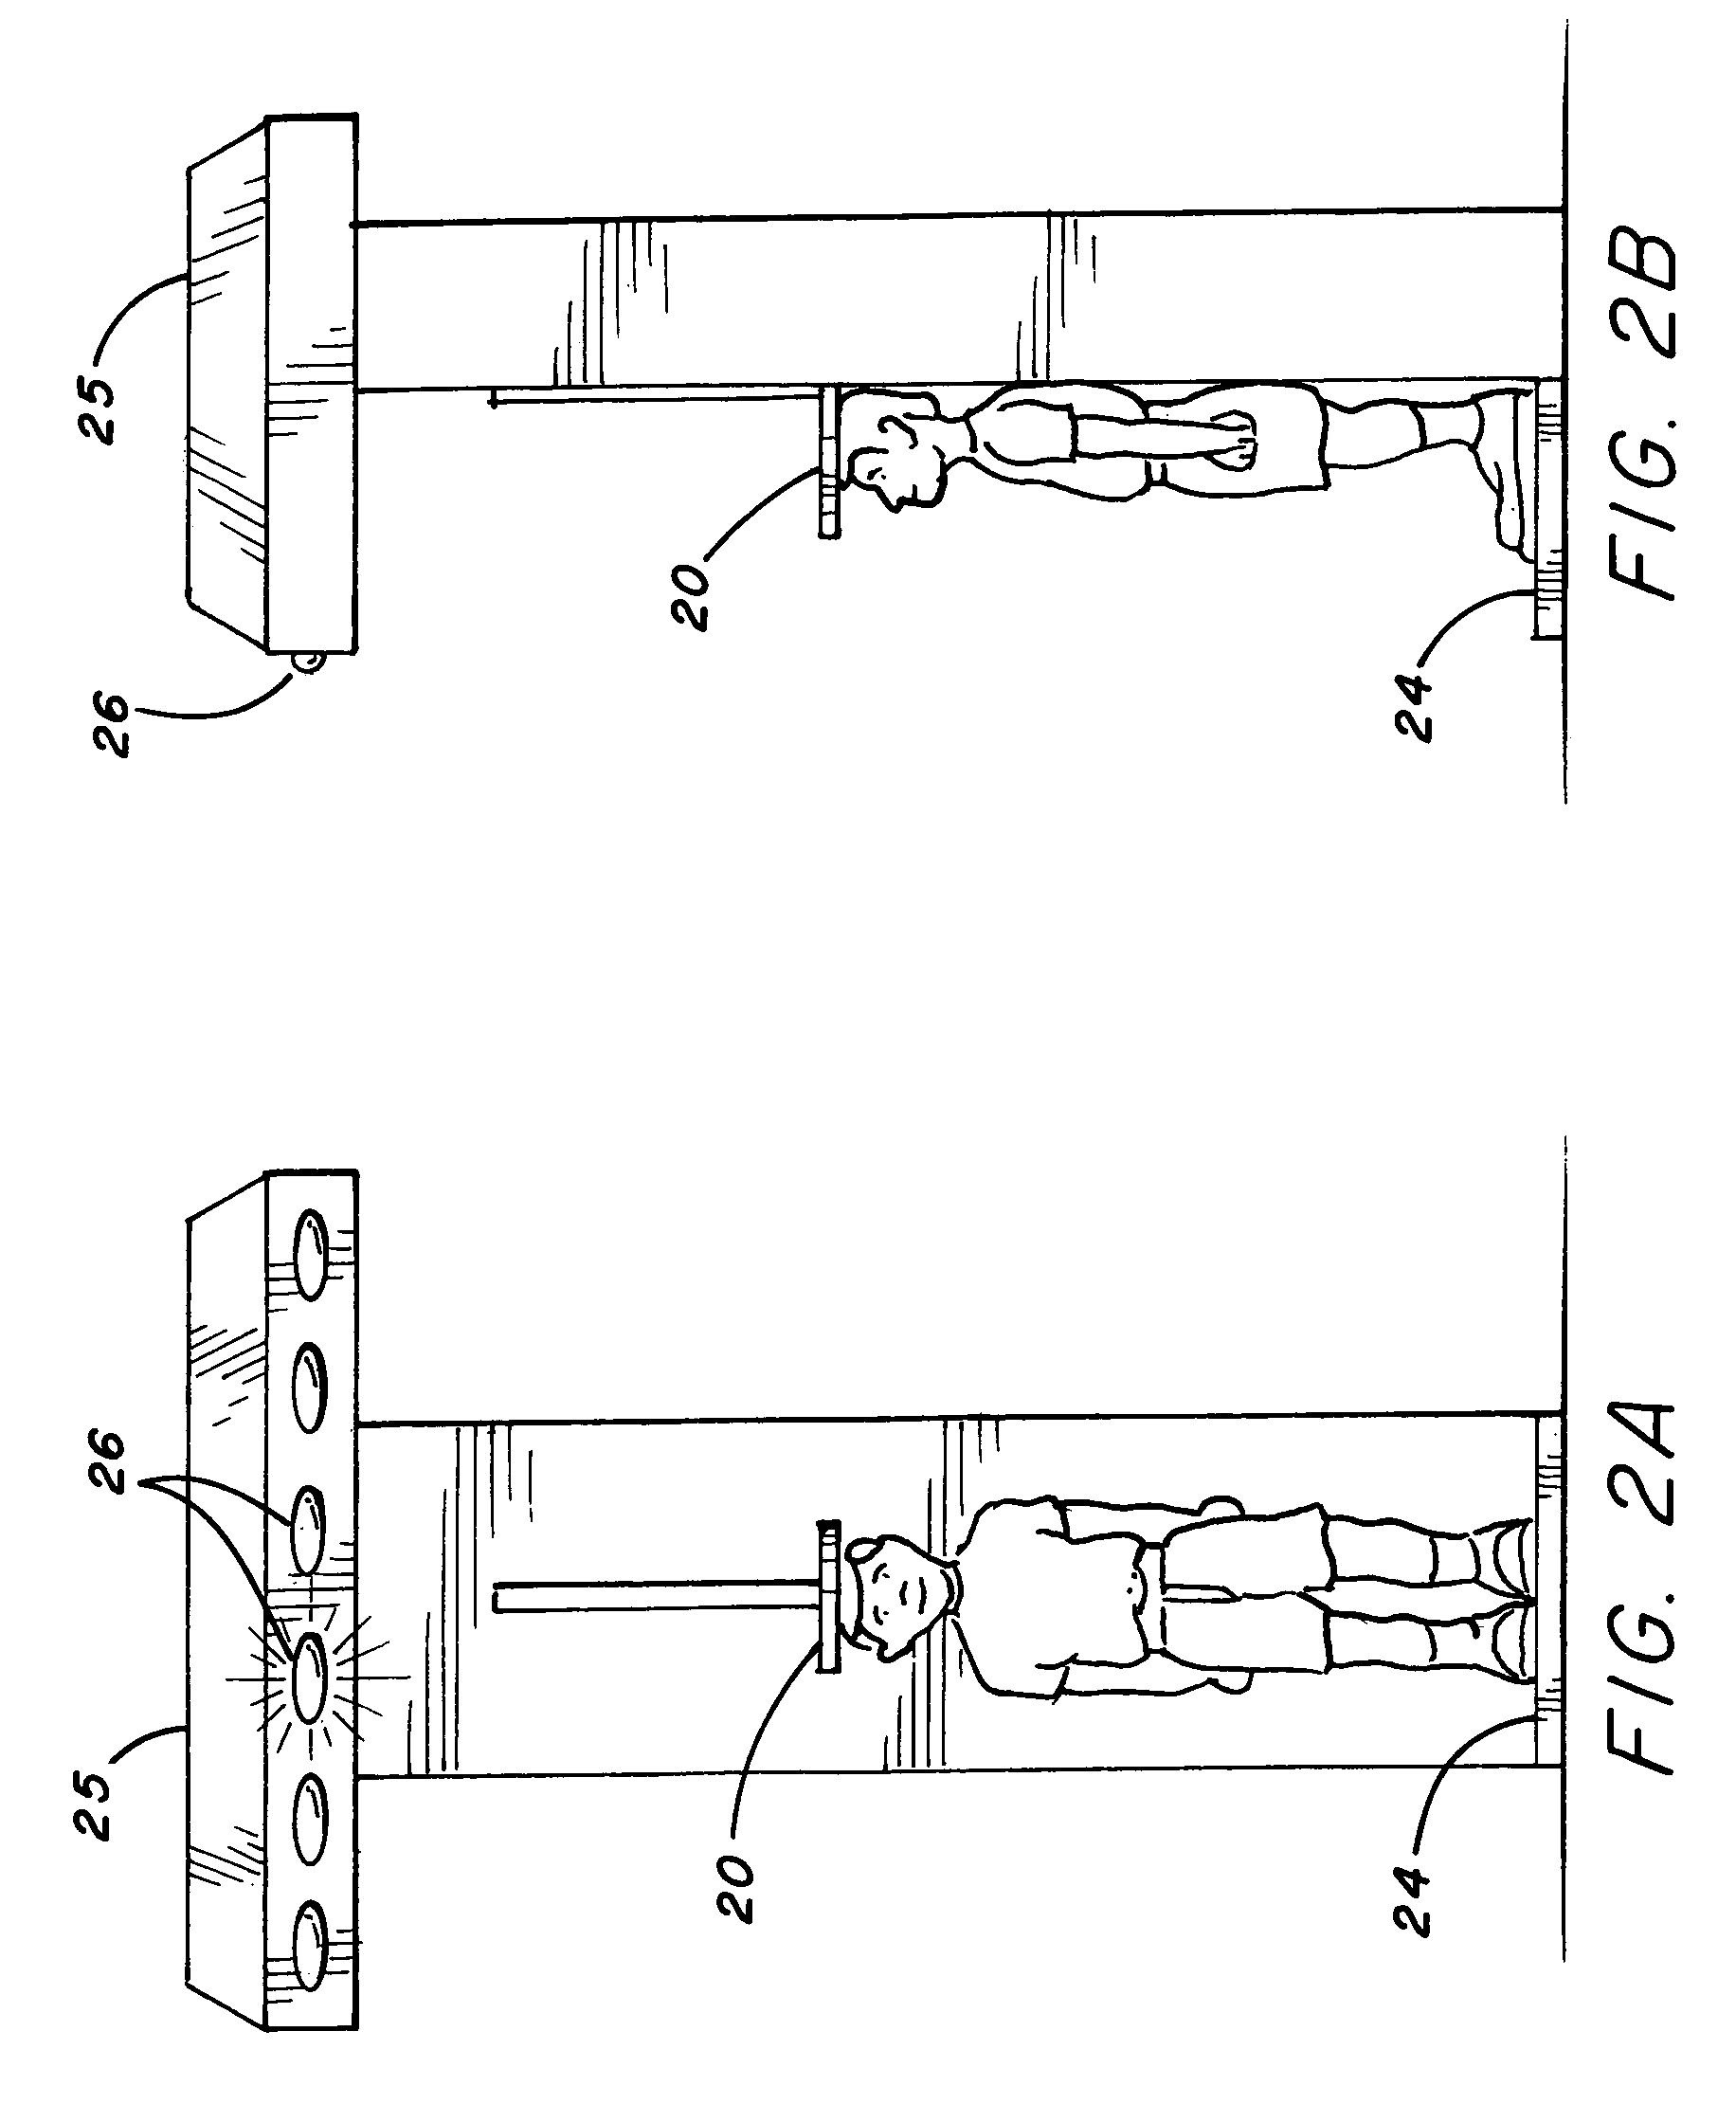 Height measurement method and apparatus